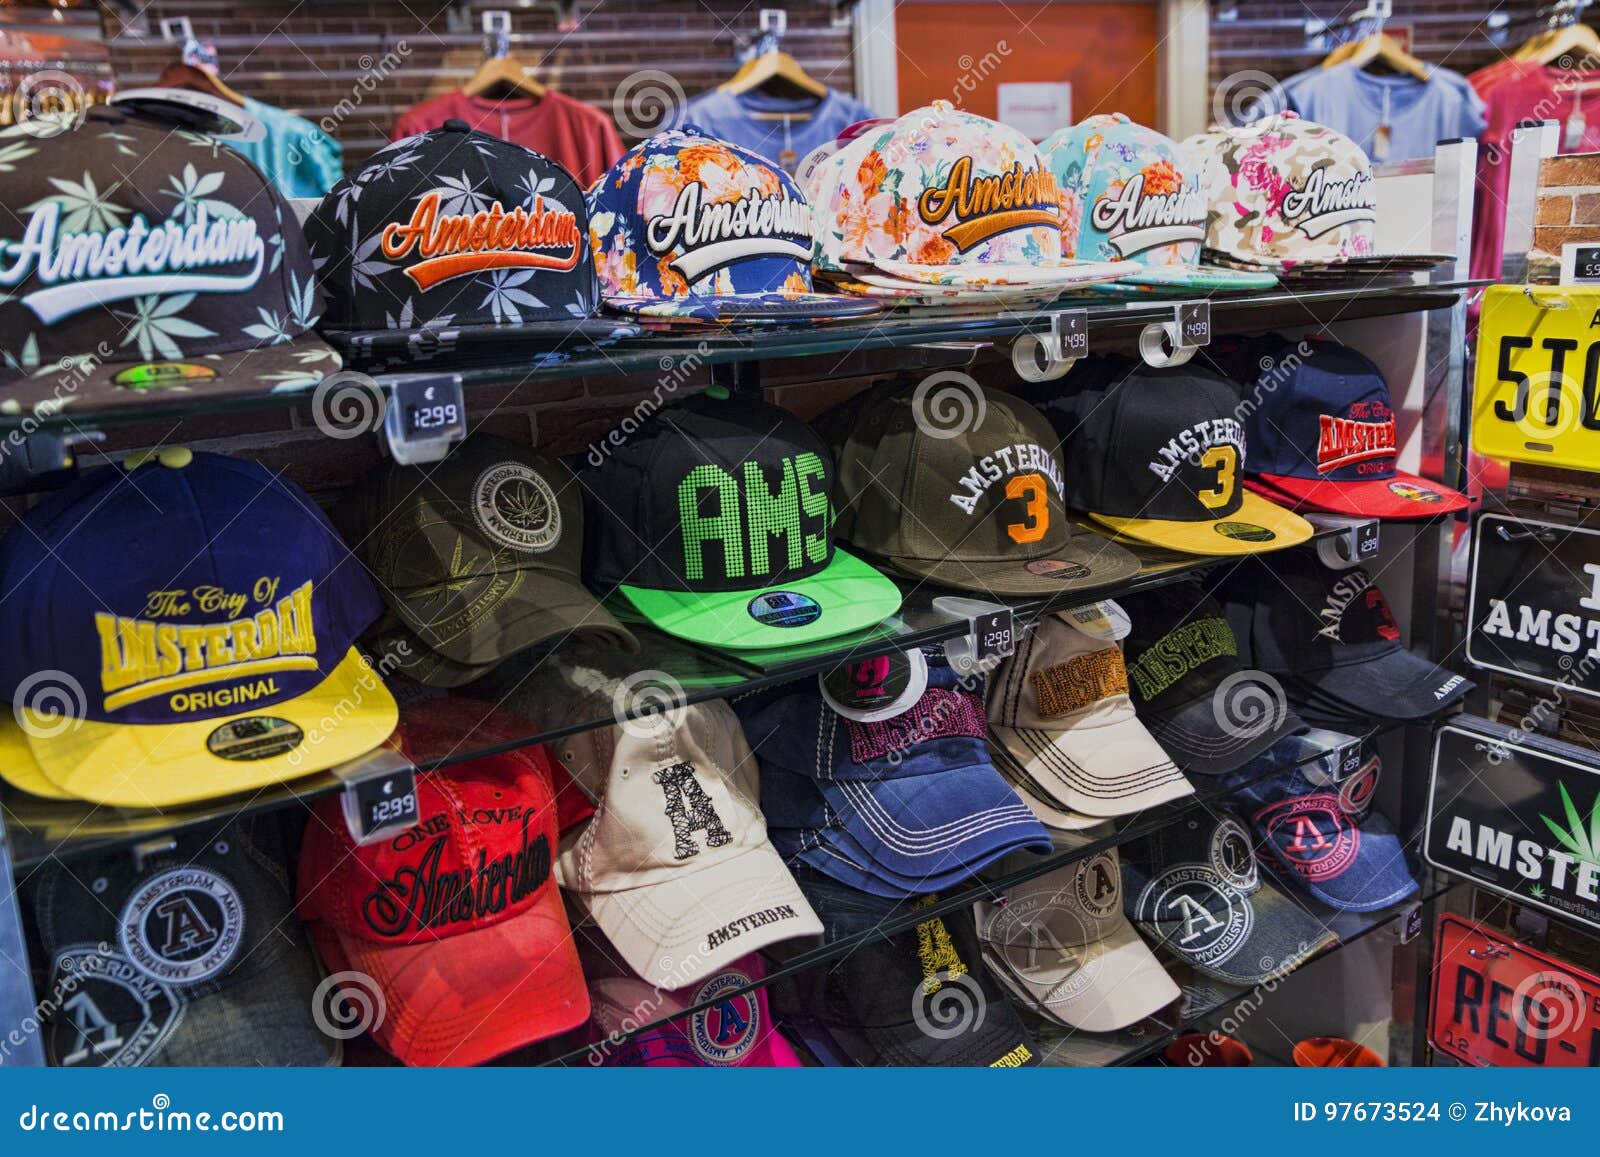 Souvenir Shop with Many Objects Editorial Image Image of color, tourism: 97673524